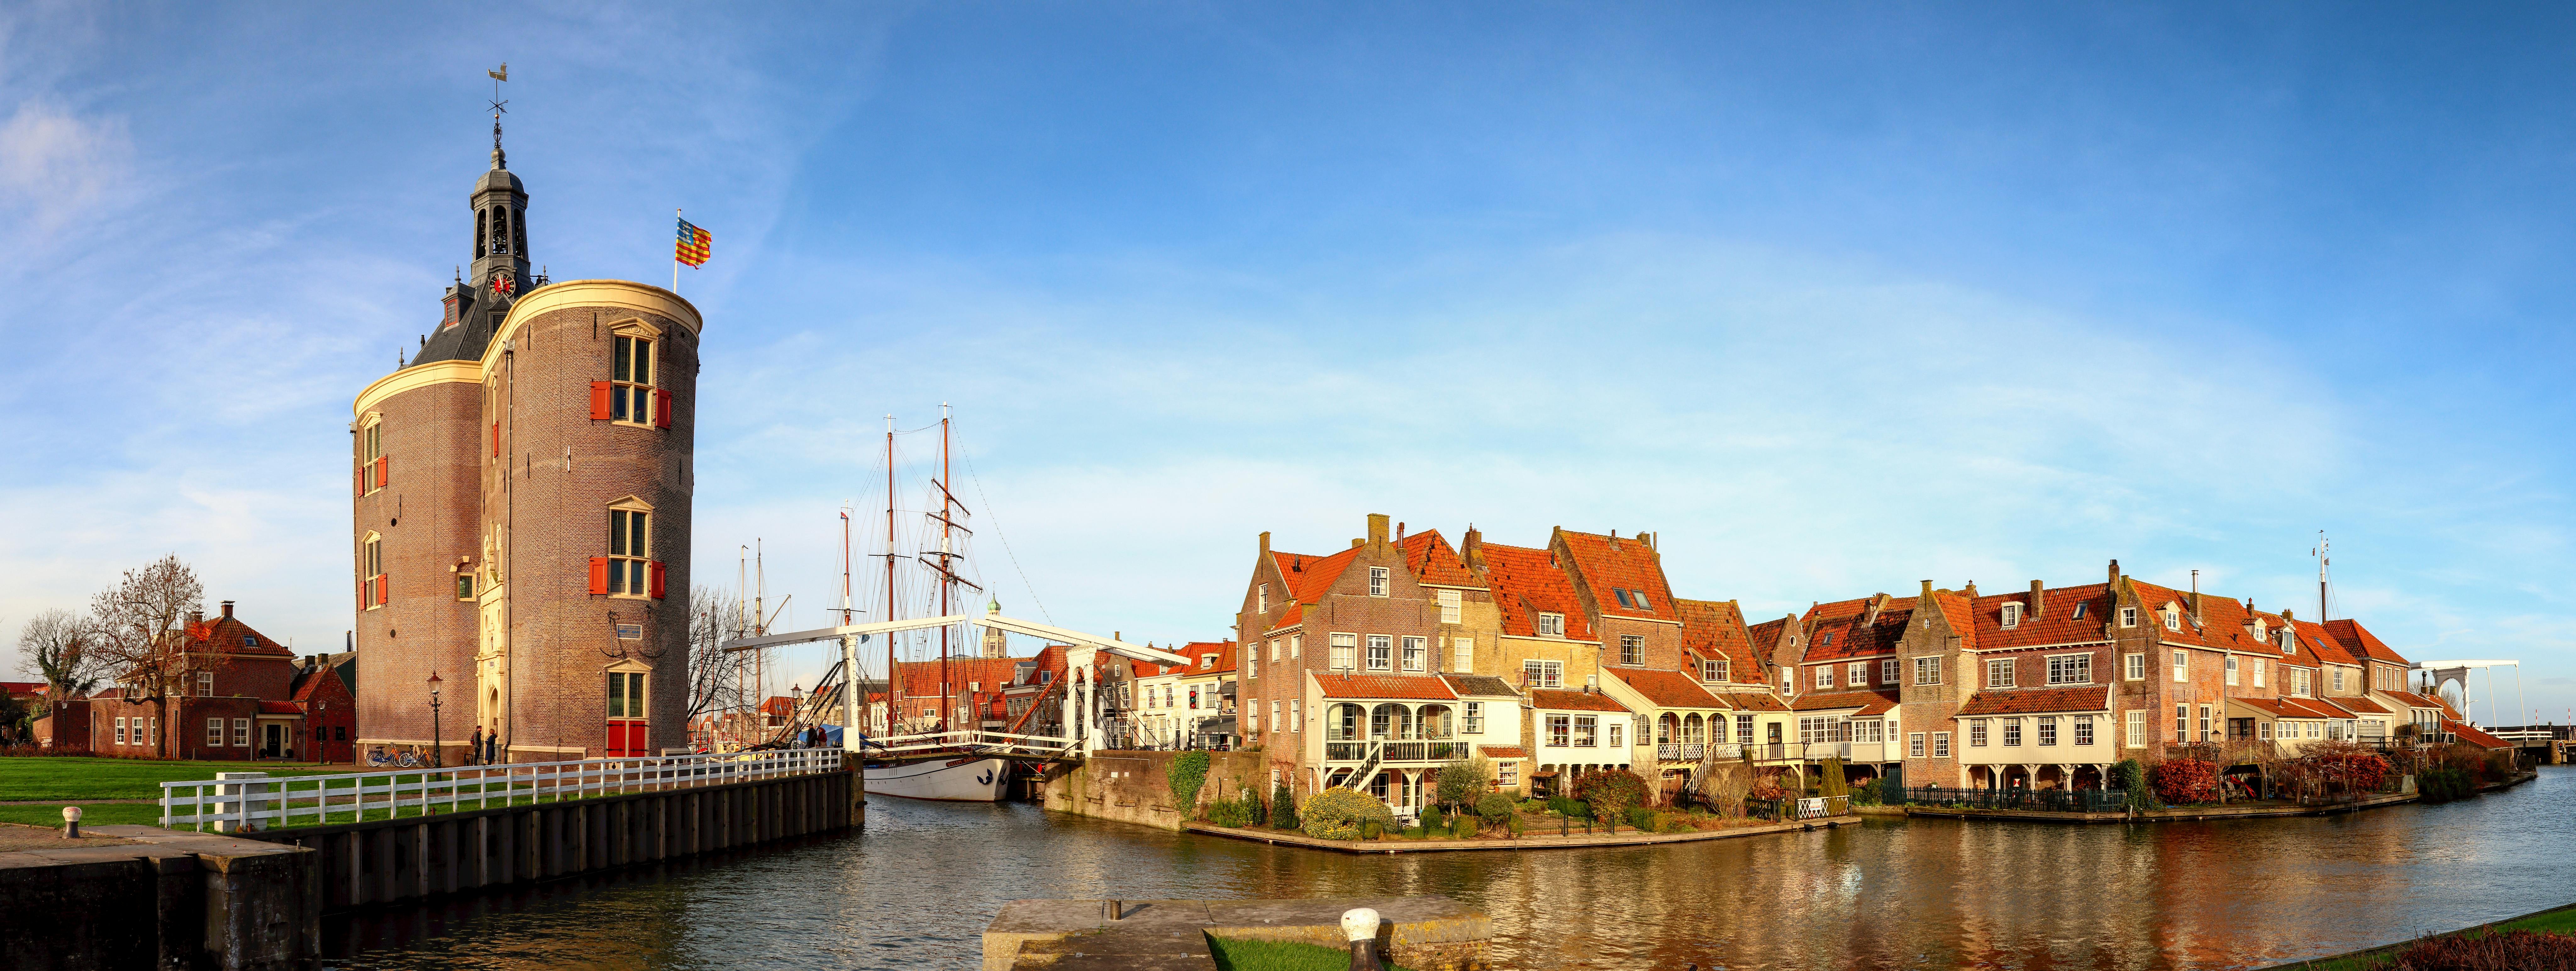 Self guided tour with interactive city game of Enkhuizen Musement